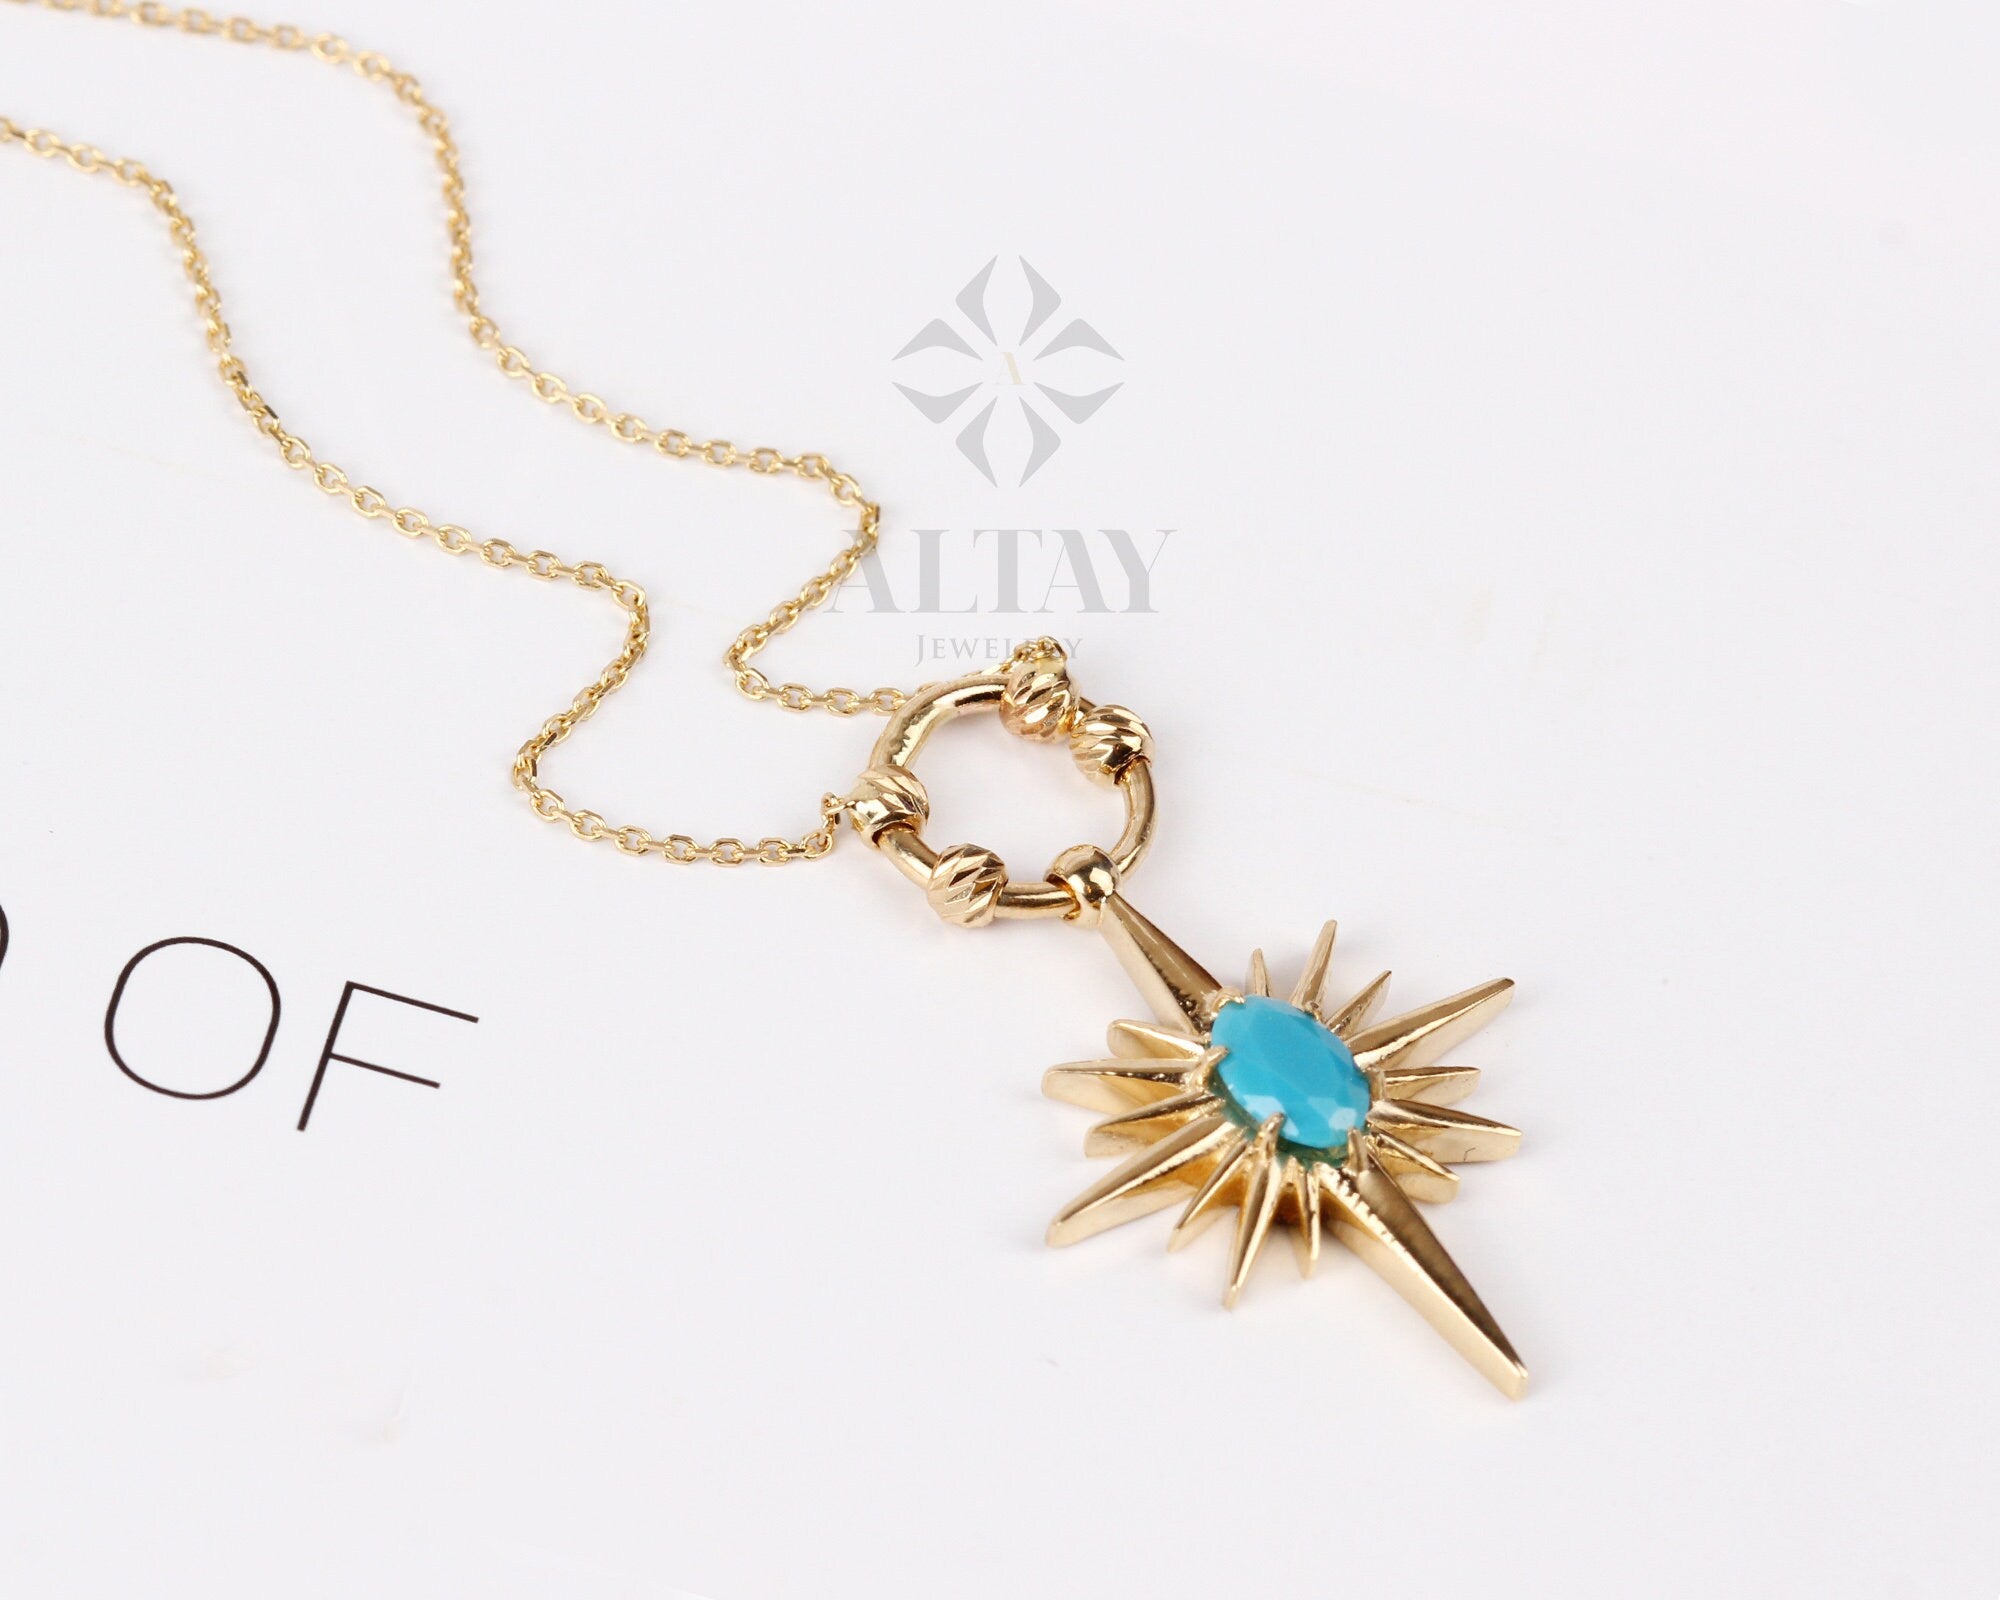 14K Gold Turquoise North Star Necklace, Celestial Starburst Pendant, Pole Star Choker, Dainty Layering Chain, Christmas, Valentines Day Gift